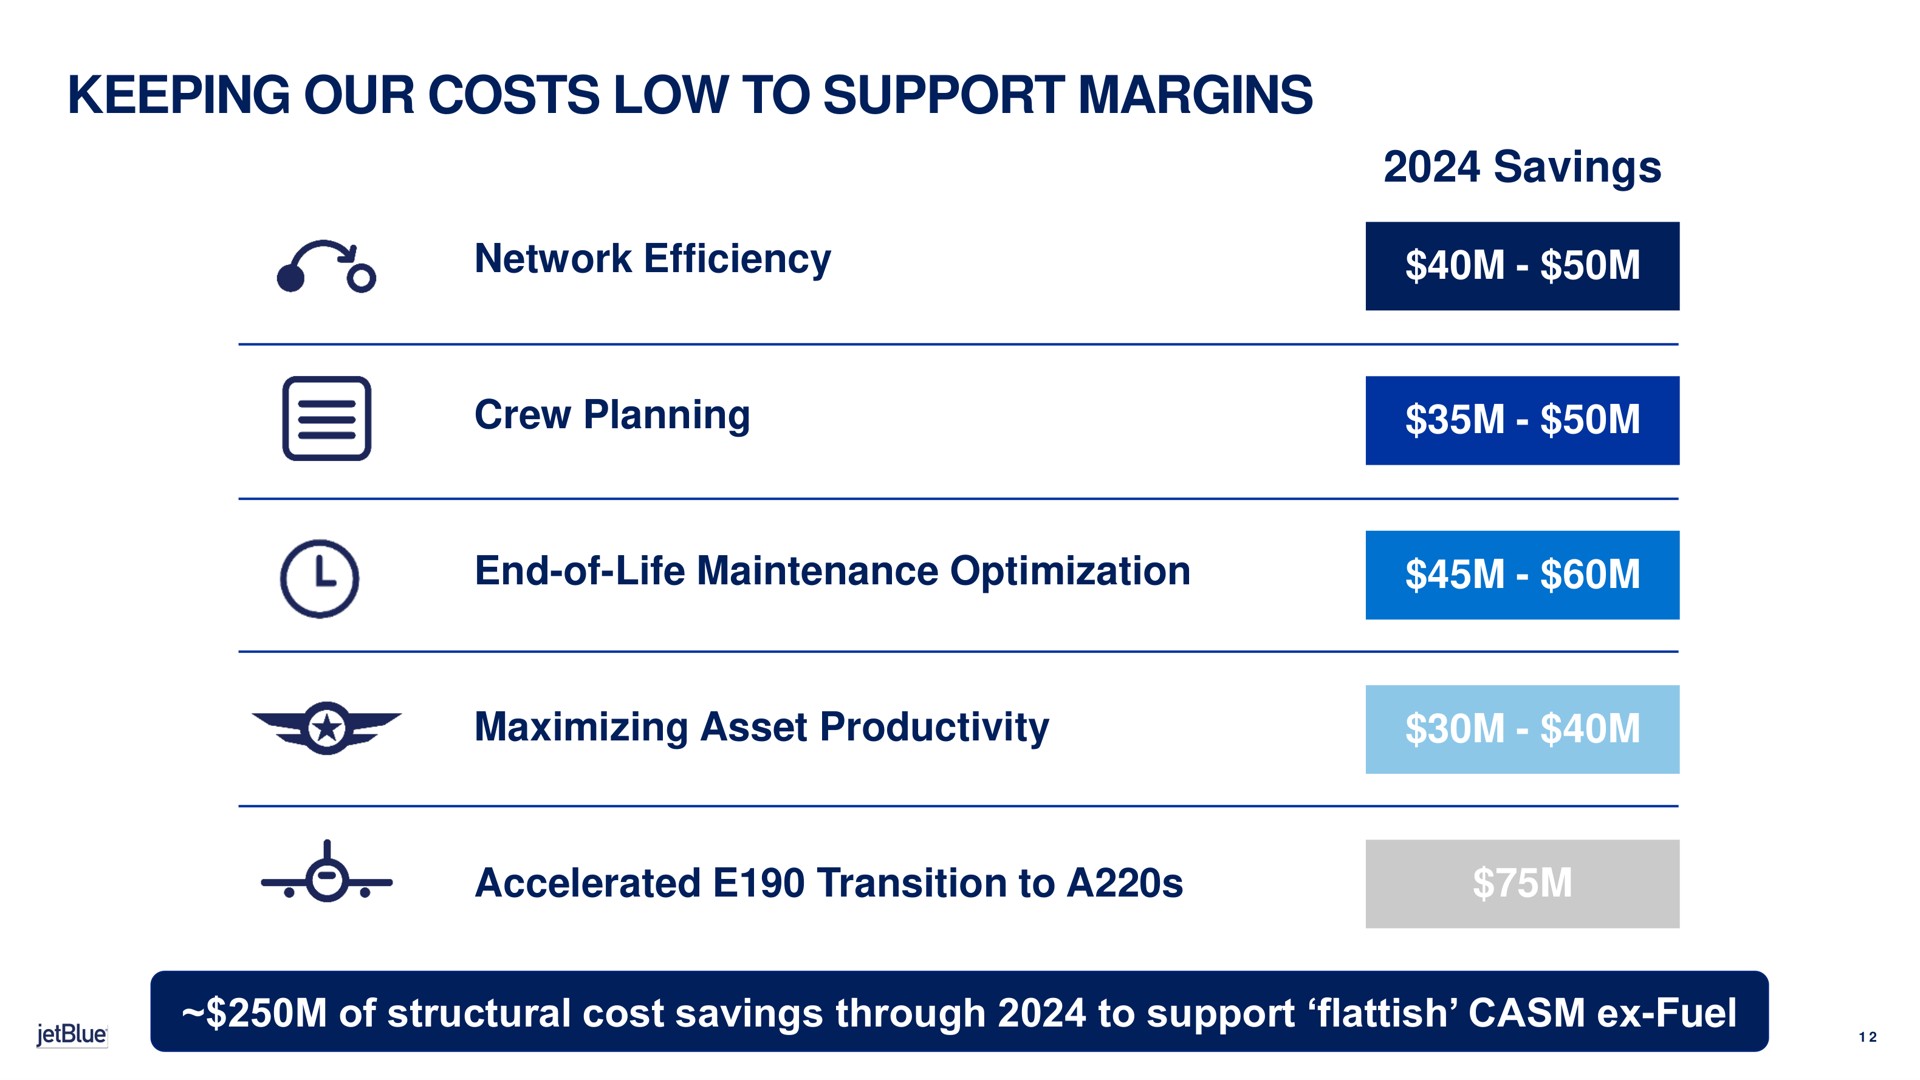 keeping our costs low to support margins network efficiency savings crew planning end of life maintenance optimization maximizing asset productivity accelerated transition to a of structural cost savings through to support flattish fuel | jetBlue